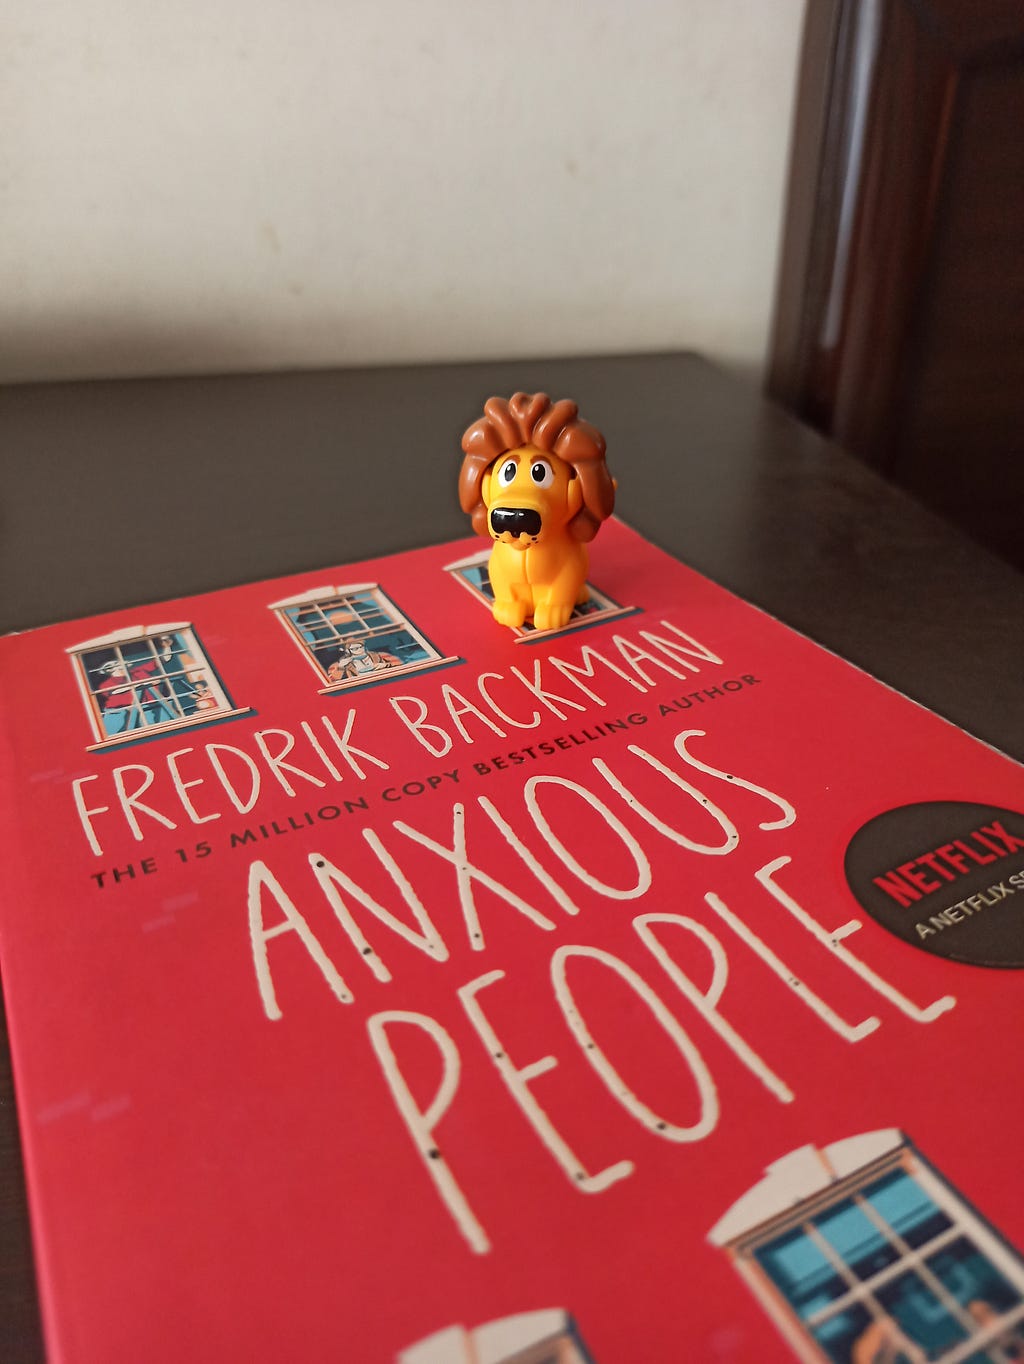 The book “Anxious People” by Fredrik Backman is placed in a table. The image shows a close up of the book. A small kinder egg lion toy is seated on top of the book.